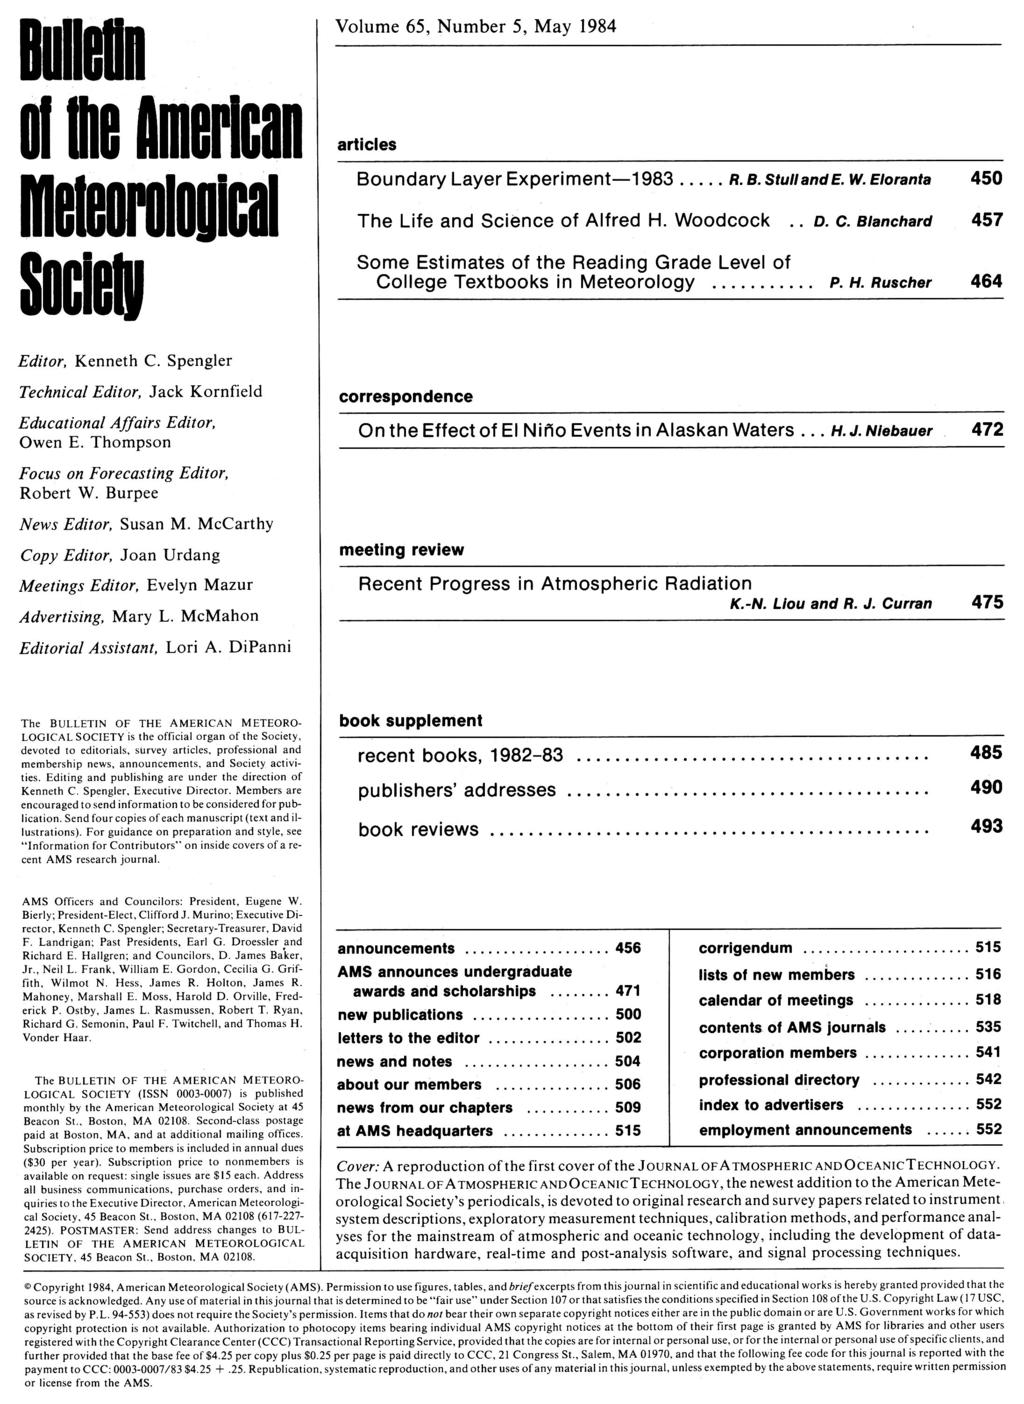 Bulletin ol the American iheorologlcal Society Volume 65, Number 5, May 1984 articles Boundary Layer Experiment 1983 R.B.stuiiandE. The Life and Science of Alfred H. Woodcock.. D. C.